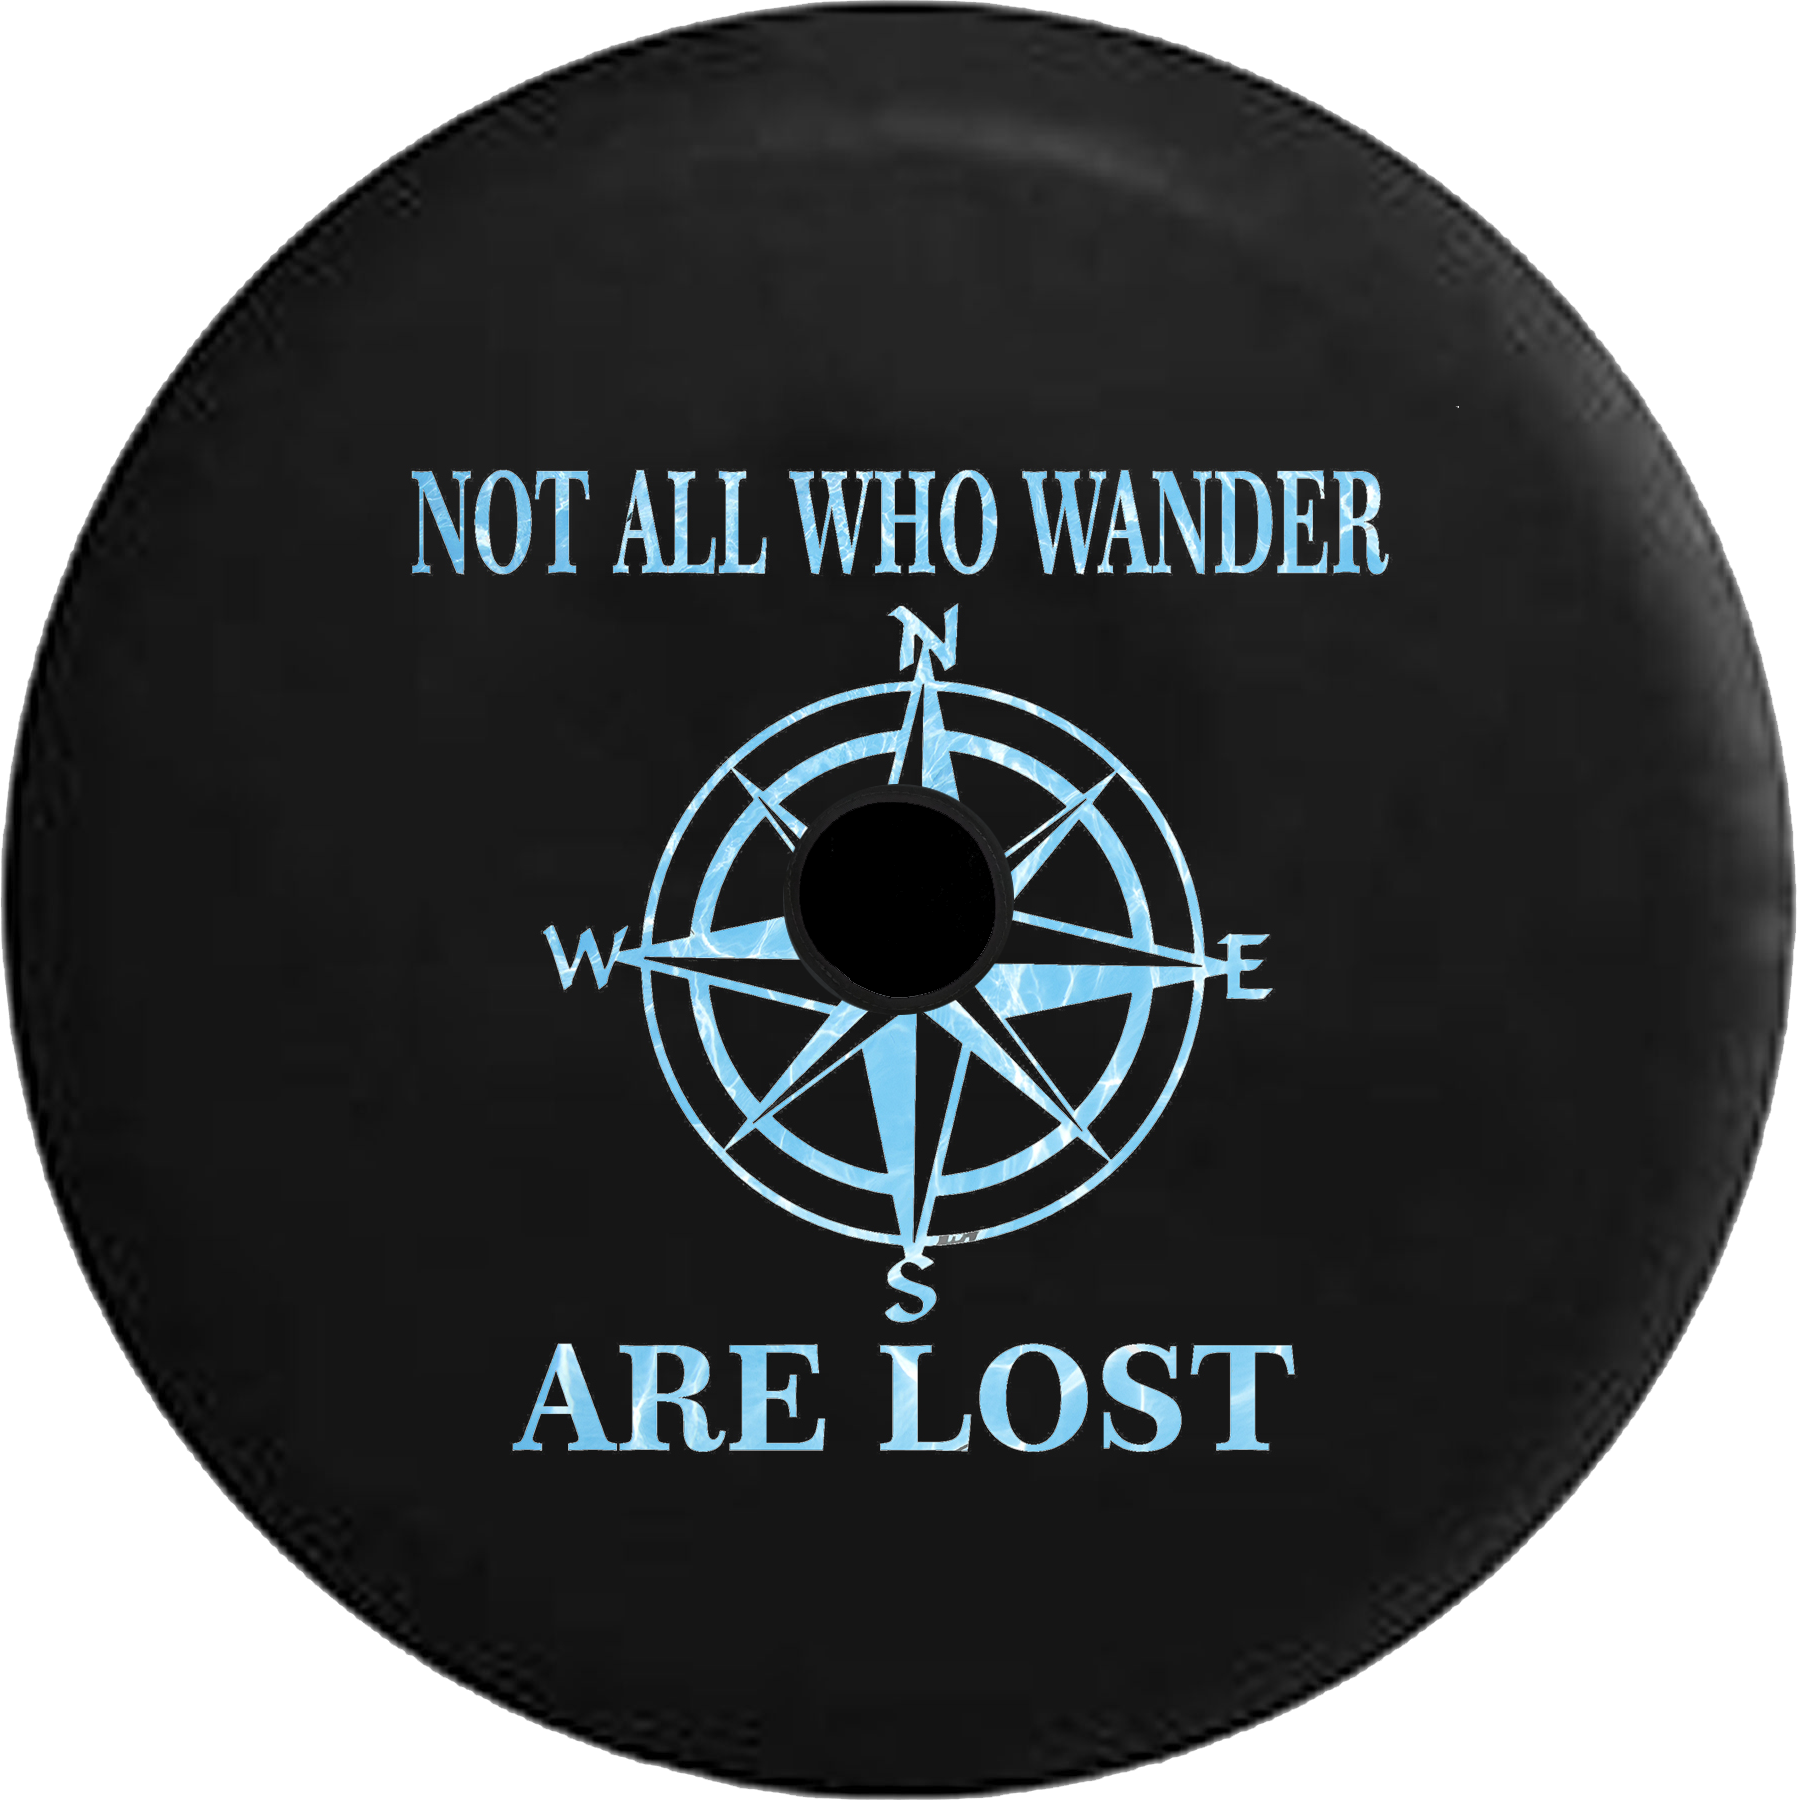 Tire Cover PRO Not All Who Wander Ocean Water Reflection Spare Tire Cover -BLACK-CUSTOM SIZE/COLOR/INK – TireCoverPro